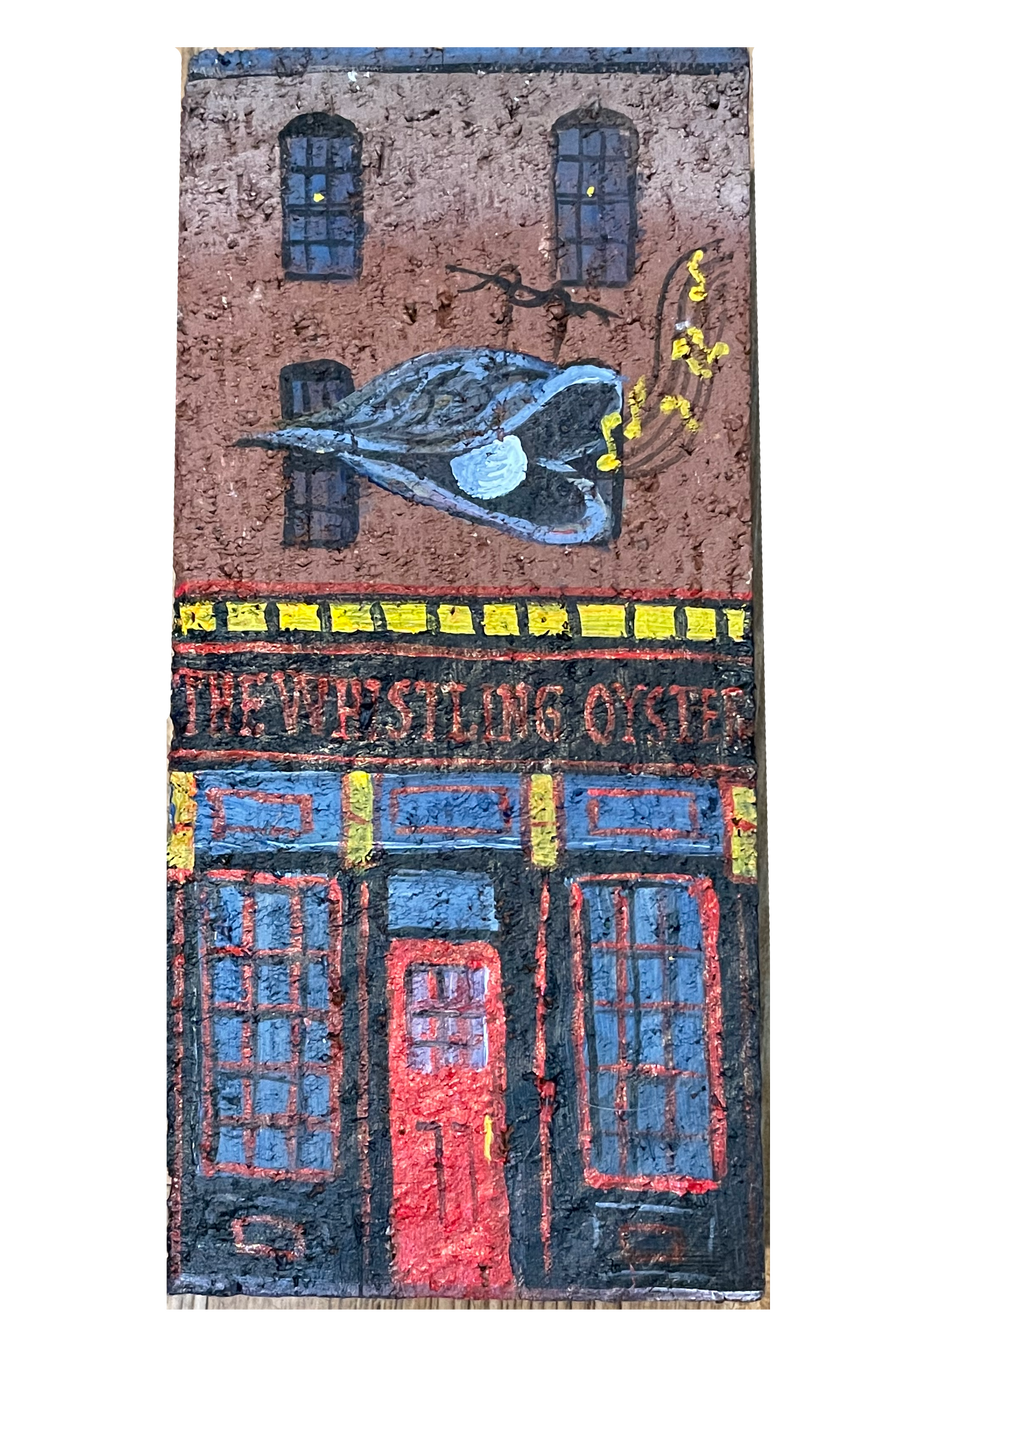 Linda Amtmann Hand Painted Brick- The Whistling Oyster